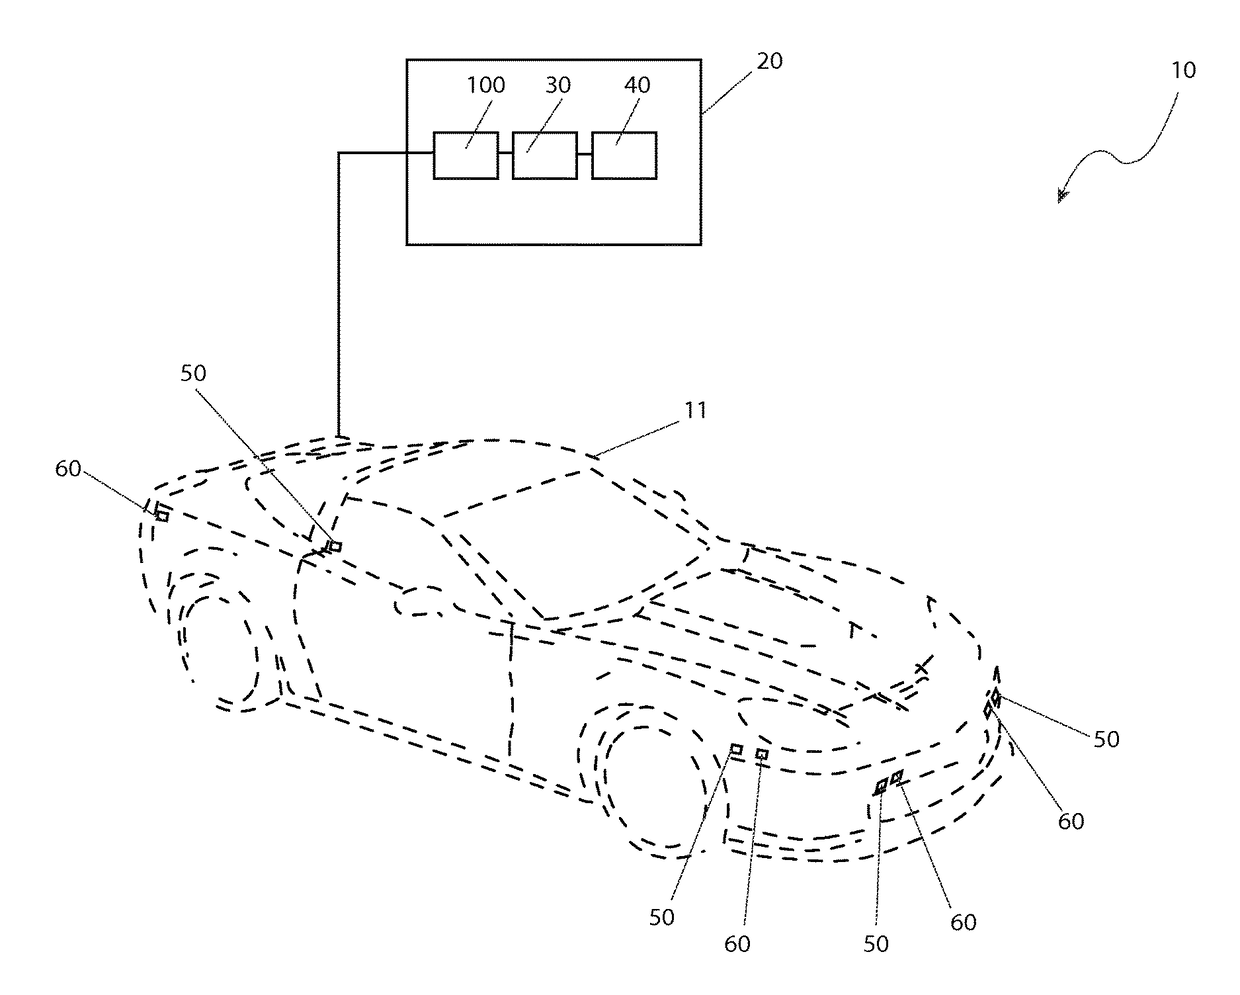 Vehicle and environmental data acquisition and conditioned response system